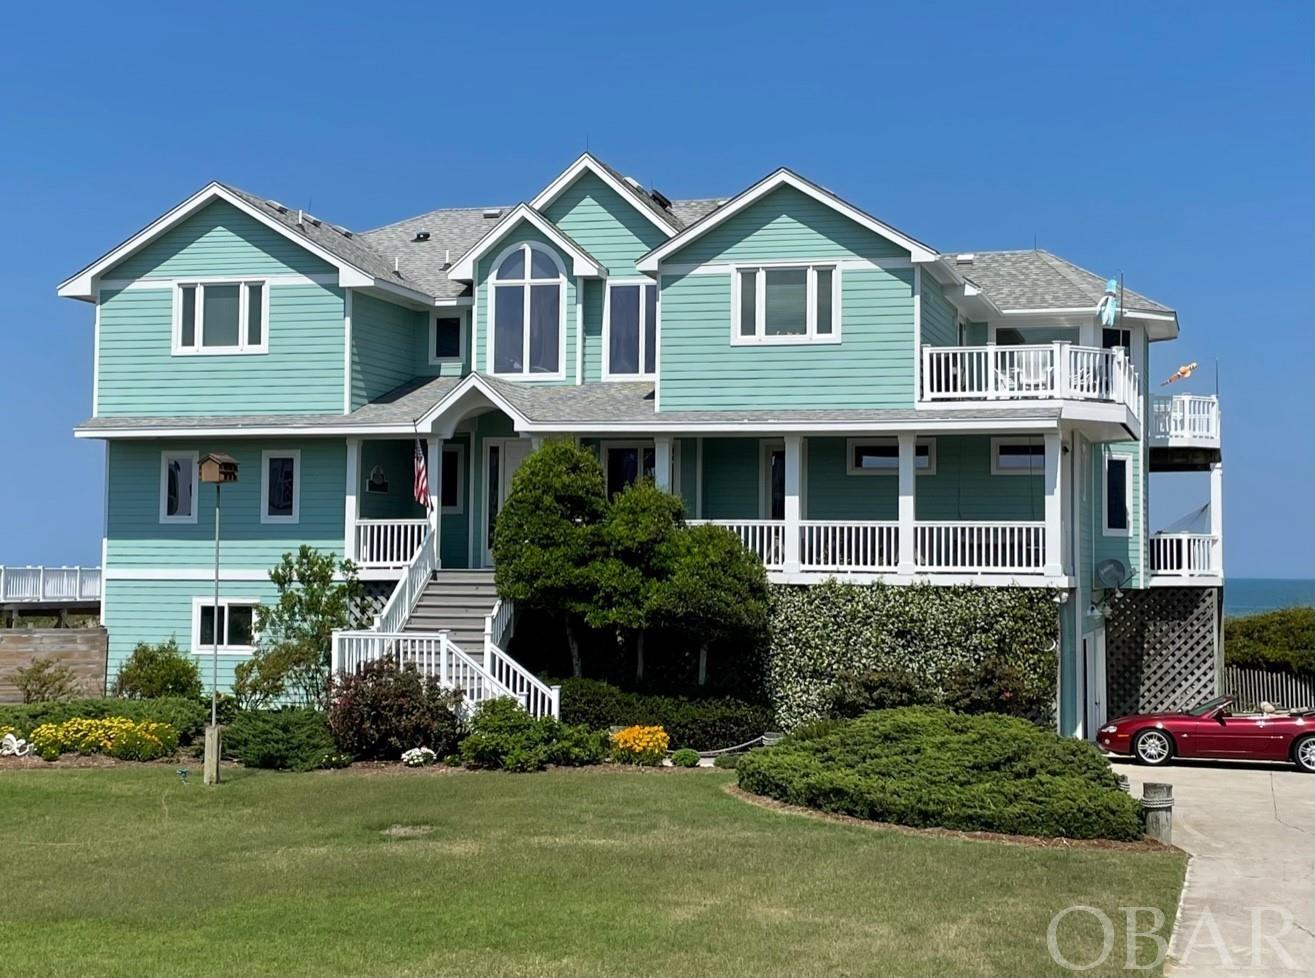 This beautiful custom oceanfront home is designed to maximize ocean, beach & lighthouse views. Located in Ocean Hill with the largest lots & setbacks in Corolla. Ocean Hill’s paved private roads protect owners from on-street parking.  Ocean Hill’s restrictive covenants protect one from 9+ bedroom mini-hotels being built in other areas.  An ideal place for  homeowners & guests. With just over 5,000 SF of air conditioned floor space, the dining & sleeping areas accommodate up to 14 guests comfortably. You enter the home from the spacious covered front porch, complete with sitting area.  The entry door opens to a large oak-floored family room. Four large windows provide your first views of the wide dune and the ocean beyond. This large family room serves as a daytime game room & a Dolby Atmos surround-sound theater after dark. Ascending the open staircase to the top level reveals the great room with spectacular panoramic ocean views of the full coast from north to south.  The great room’s granite fireplace surround and oak mantle are framed by custom oak shelving & a second surround-sound video system.  The open floor plan flows to a large dining area with views of the Ocean & Currituck Lighthouse.  This is adjacent to the spacious modern kitchen with cook island that opens to the lighthouse deck for outdoor grilling & dining with sunset & lighthouse views. The great room also opens to a large oceanside deck to watch the sunrise. The upper-level owner suite has two sitting areas: one in front of four large oceanfront windows, for enjoying the ever-changing views of sea and sky; the second faces the fireplace & TV for a relaxing private evening. This suite features separate his & her walk-in closets/dressing rooms & a large custom tiled bathroom with spacious shower area & a separate heated Jacuzzi tub.  The well-lit area features his & hers vanities & a hidden laundry chute. The mid-level has been designed to offer  separate accommodations. To the north is a large king bedroom with sitting area & ensuite bath. Next is a four-bed bunk room.  The north side also has a combined laundry/ hobby room with a full sink, desk area, built-in cabinets & cedar closet storage. The south side has an oceanfront king bed suite with walk-in closet & Jacuzzi tub; plus ocean views & deck access. Mid-level deck has a large hot tub & a shaded hammock with ocean & Lighthouse views. Across the hall is a queen bed suite that opens to a covered front porch with porch swing & seating with great sunset & lighthouse views.  The ground level features a large bonus room with king sofa bed, ensuite bath, mini-kitchen with fridge & wet bar. The garage area is for two cars out of the elements; plus a large storage area & an enclosed work room.  An elevator allows easy access from the enclosed garage area to both the mid & upper levels. All floors have deck access to a walkway over the dune to a large deck suitable for entertaining with stairs to the beach.  There is even room for a swimming pool within the CAMA guidelines if desired.  After a day on the beach or a night in the hot tub you can rinse off using the walkway head & foot shower or the two private enclosed outside showers. The nicely landscaped front yard is good  for lawn games. Below the lawn, the septic system can be expanded to the Ocean Hill 8 bedroom limit. The driveway & garage support parking for at least 8 cars. This home was built to last.  The home’s foundation is secured by more than 40 large diameter driven pilings extending well below sea level, a feature of original builder Pete Hunter.  In 2010 an expansion & remodel was done by Olin Finch, including total upgrade of plumbing, power systems, windows, roof, decks, siding, interior floors, finishes & appliances. The home exterior was painted in 2021 and it has been very well maintained by the resident owner. Projected 2023 Income Advertised Rates: $162,932.00; w added Private Pool: $229,019.00. W 8 Bedrooms: Projection is $277,767.00.